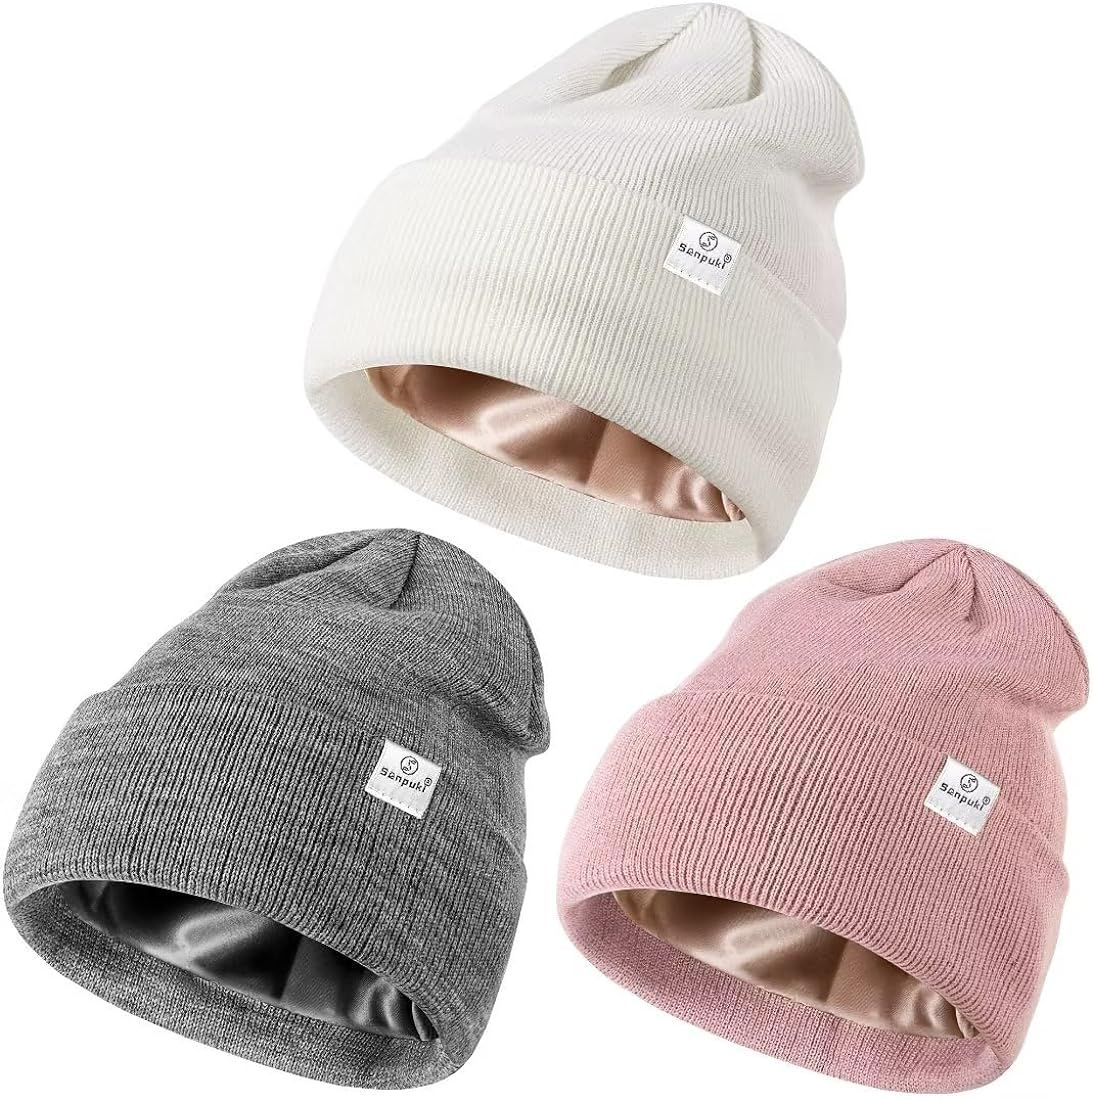 3 Pack Satin Lined Winter Beanie Hats for Women Men,Silk Lined Beanie Knit Soft Warm Cuffed Hat | Amazon (US)